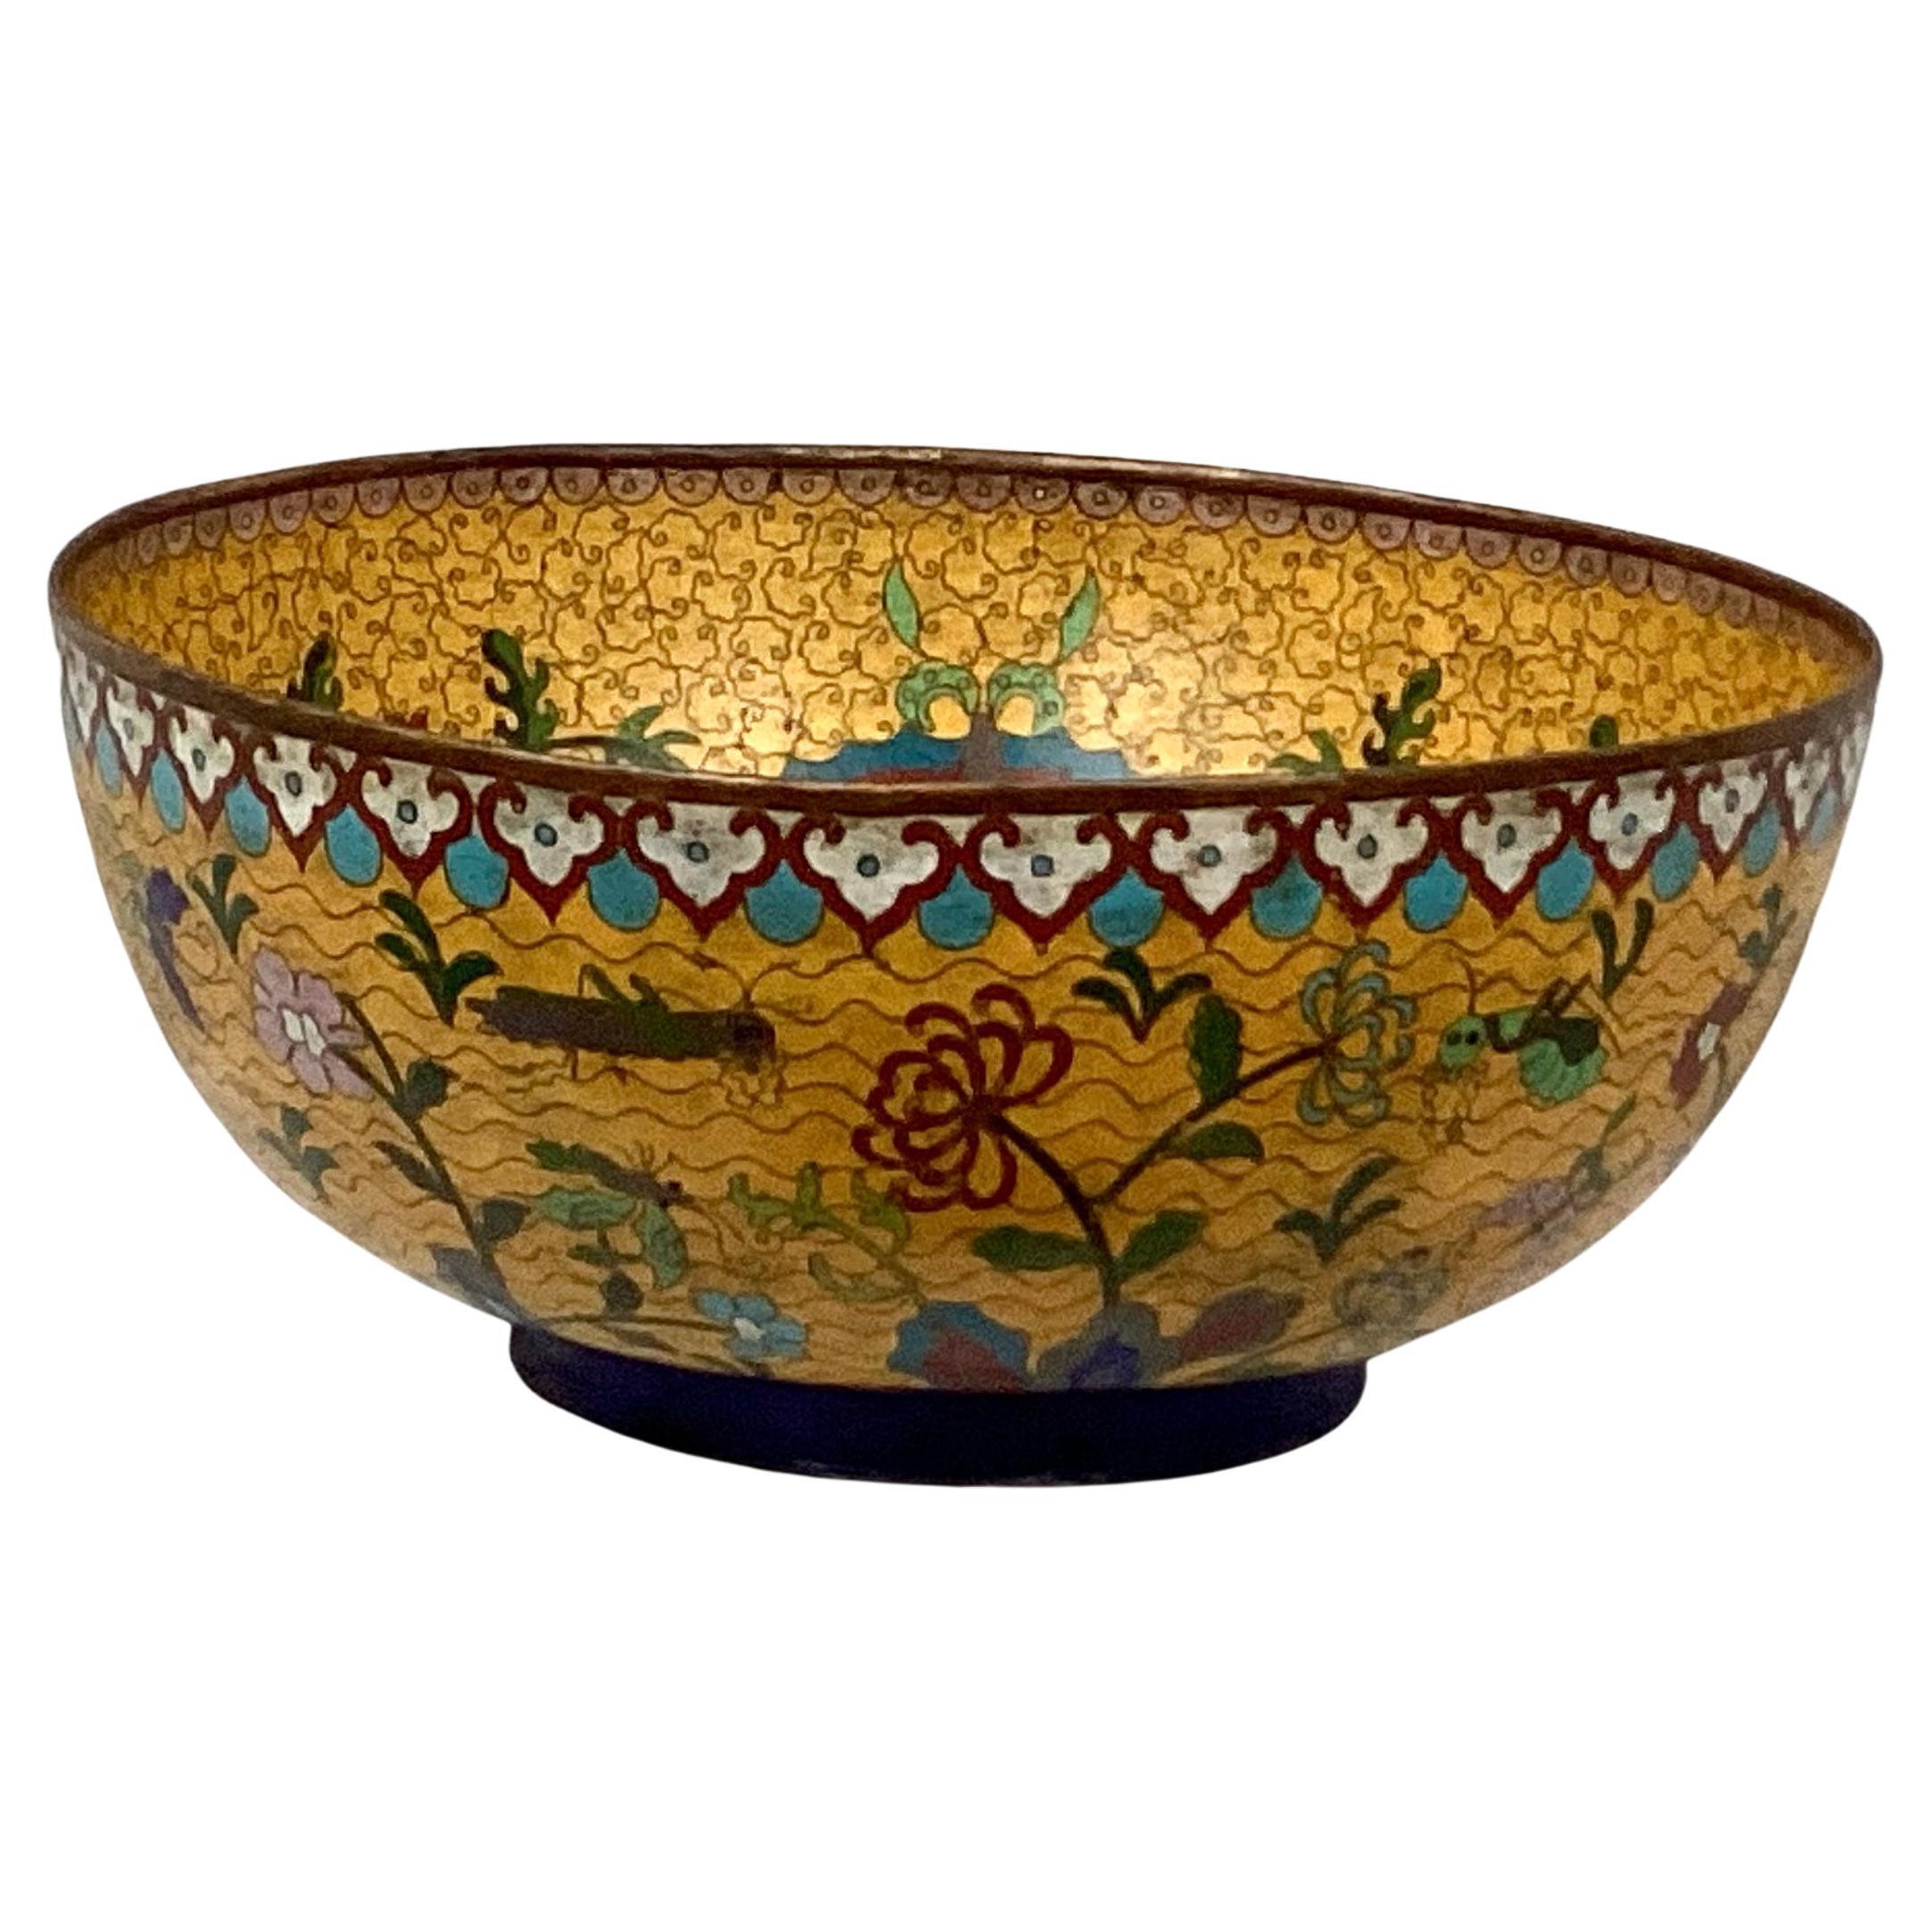 Rare 18th century Chinese Bronze Cloisonne enamel footed hand-painted bowl. Decorated with flowers and butterflies in colors of red, blue, and green on a mustard yellow background.